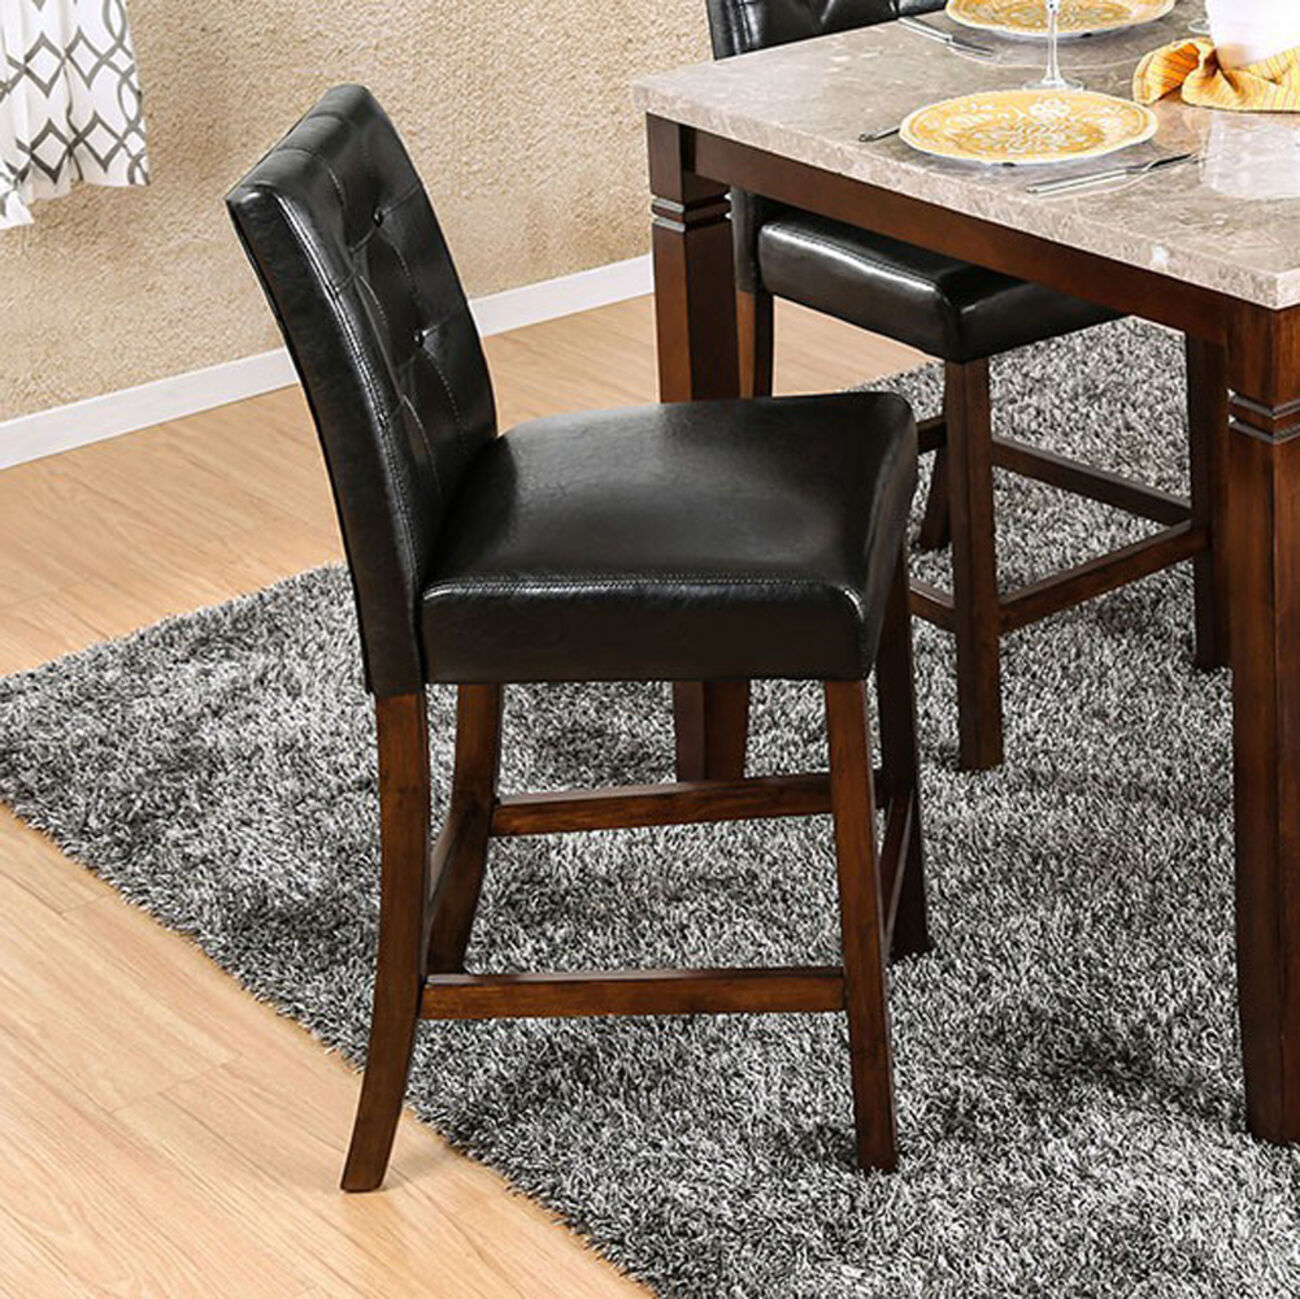 Marstone II Counter Heigh Chair, Brown Cherry & Black, Set Of 2